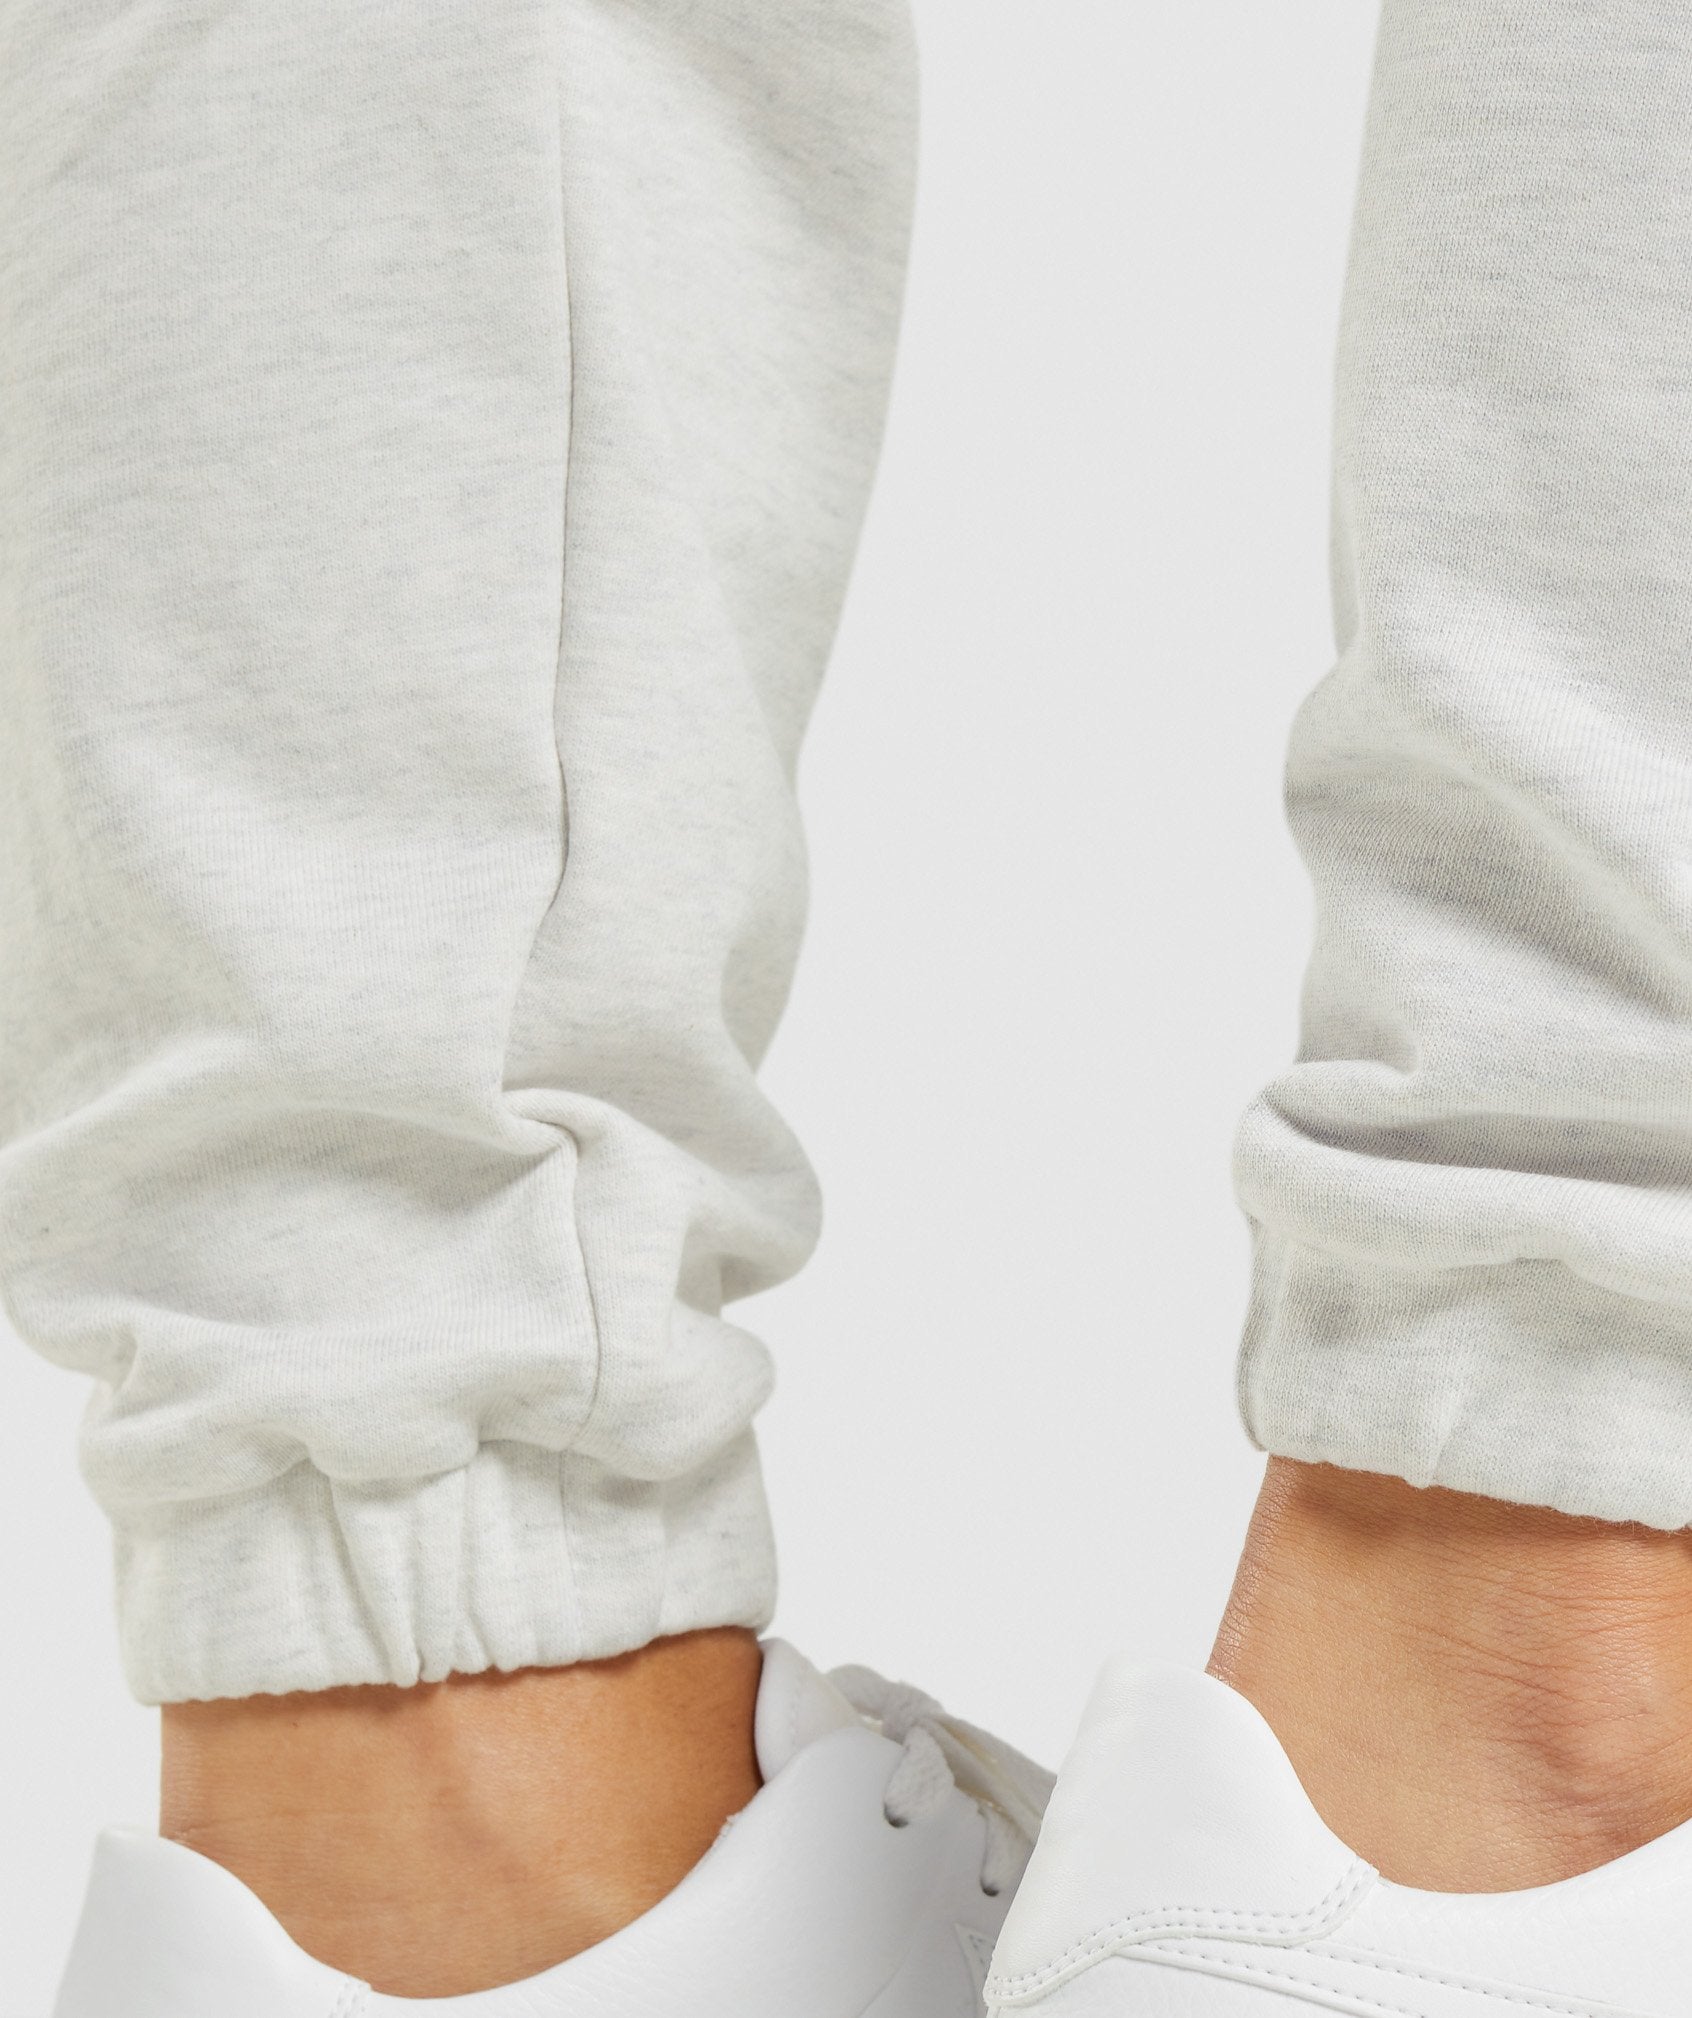 Rest Day Sweats Joggers in White Marl